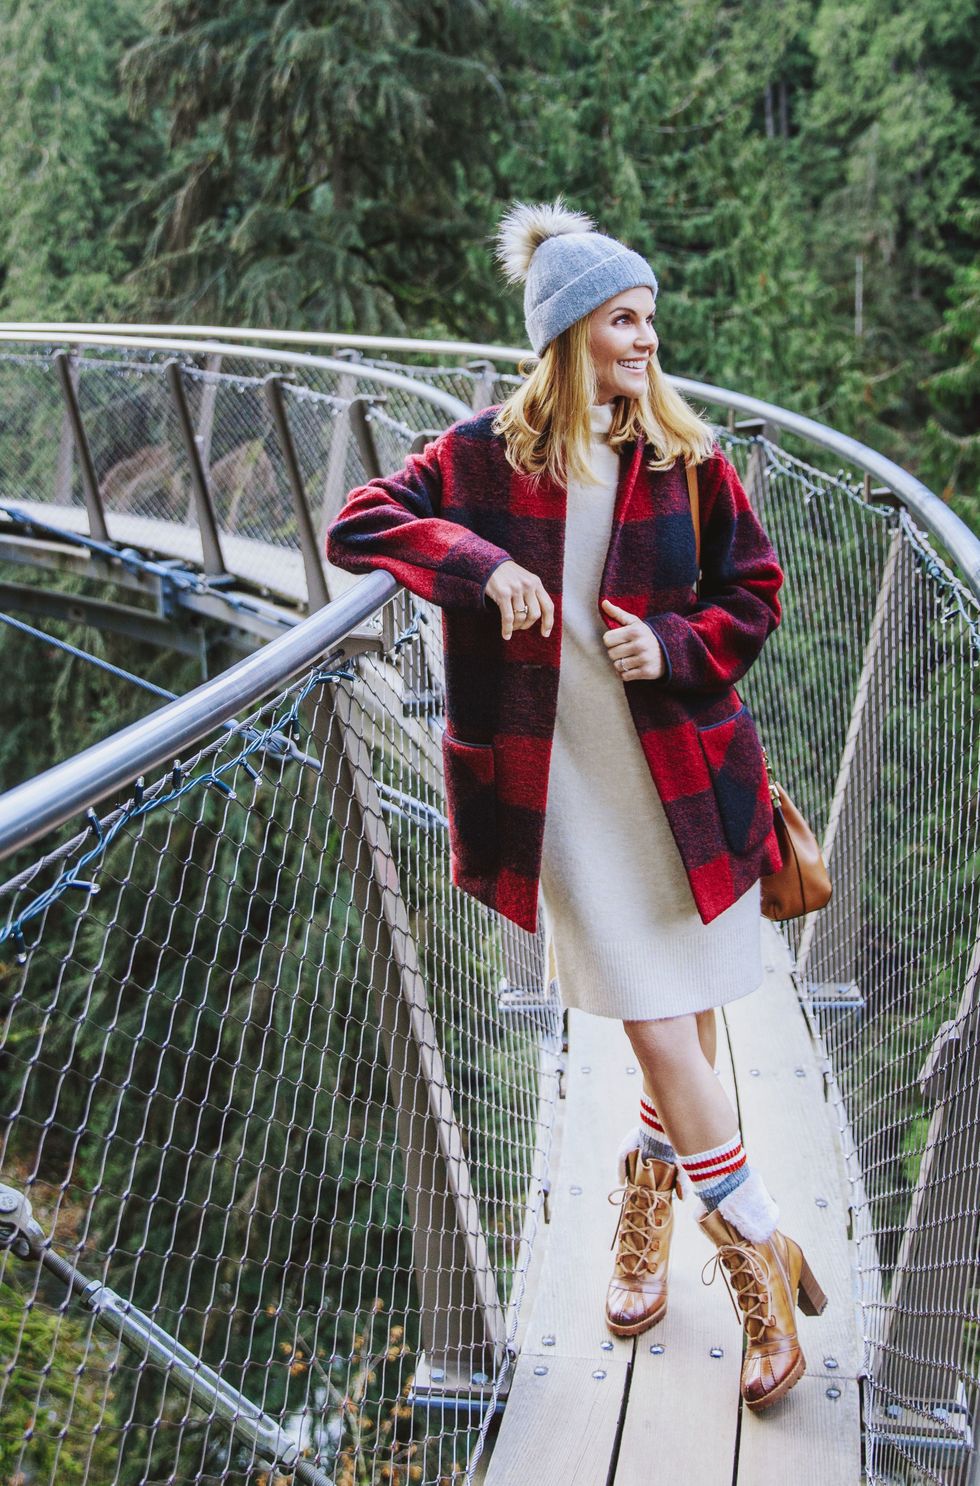 <p>Cozy up in buffalo&nbsp;checks, lug-soled boots or&nbsp;other things fit for a log cabin.</p><p><em data-redactor-tag="em" data-verified="redactor"><strong data-redactor-tag="strong" data-verified="redactor">Sweater coat, </strong>$250, <strong data-redactor-tag="strong" data-verified="redactor">dress, </strong>$98, and <strong data-redactor-tag="strong" data-verified="redactor">hat</strong><strong data-redactor-tag="strong" data-verified="redactor">, </strong>$45, <a href="http://www.aritzia.com" target="_blank" data-tracking-id="recirc-text-link">aritzia.com</a>. <strong data-redactor-tag="strong" data-verified="redactor">Ring,</strong> $10, <a href="http://www.charmingcharlie.com" target="_blank" data-tracking-id="recirc-text-link">charmingcharlie.com</a>. <strong data-redactor-tag="strong" data-verified="redactor">Ring (worn throughout on left hand), </strong>Lori's own. <strong data-redactor-tag="strong" data-verified="redactor">Purse,</strong>&nbsp;$225,&nbsp;<a href="http://www.aritzia.com/" target="_blank" data-tracking-id="recirc-text-link">aritzia.com</a><span class="redactor-invisible-space" data-verified="redactor" data-redactor-tag="span" data-redactor-class="redactor-invisible-space"></span>. <strong data-redactor-tag="strong" data-verified="redactor">Socks (similar), </strong><a href="http://www.roots.com" target="_blank" data-tracking-id="recirc-text-link">roots.com</a></em><em data-redactor-tag="em" data-verified="redactor">. <strong data-redactor-tag="strong" data-verified="redactor">Boots,</strong> $250, <a href="http://pikolinos.com" target="_blank" data-tracking-id="recirc-text-link">pikolinos.com</a>.</em></p><p><strong data-redactor-tag="strong" data-verified="redactor">TRAVEL TIP: </strong>Walk among the&nbsp;treetops at the <a href="http://www.capbridge.com" target="_blank" data-tracking-id="recirc-text-link">Cliffwalk</a>,&nbsp;a series of winding&nbsp;walkways set 300 feet&nbsp;above the Capilano&nbsp;River.&nbsp;</p>